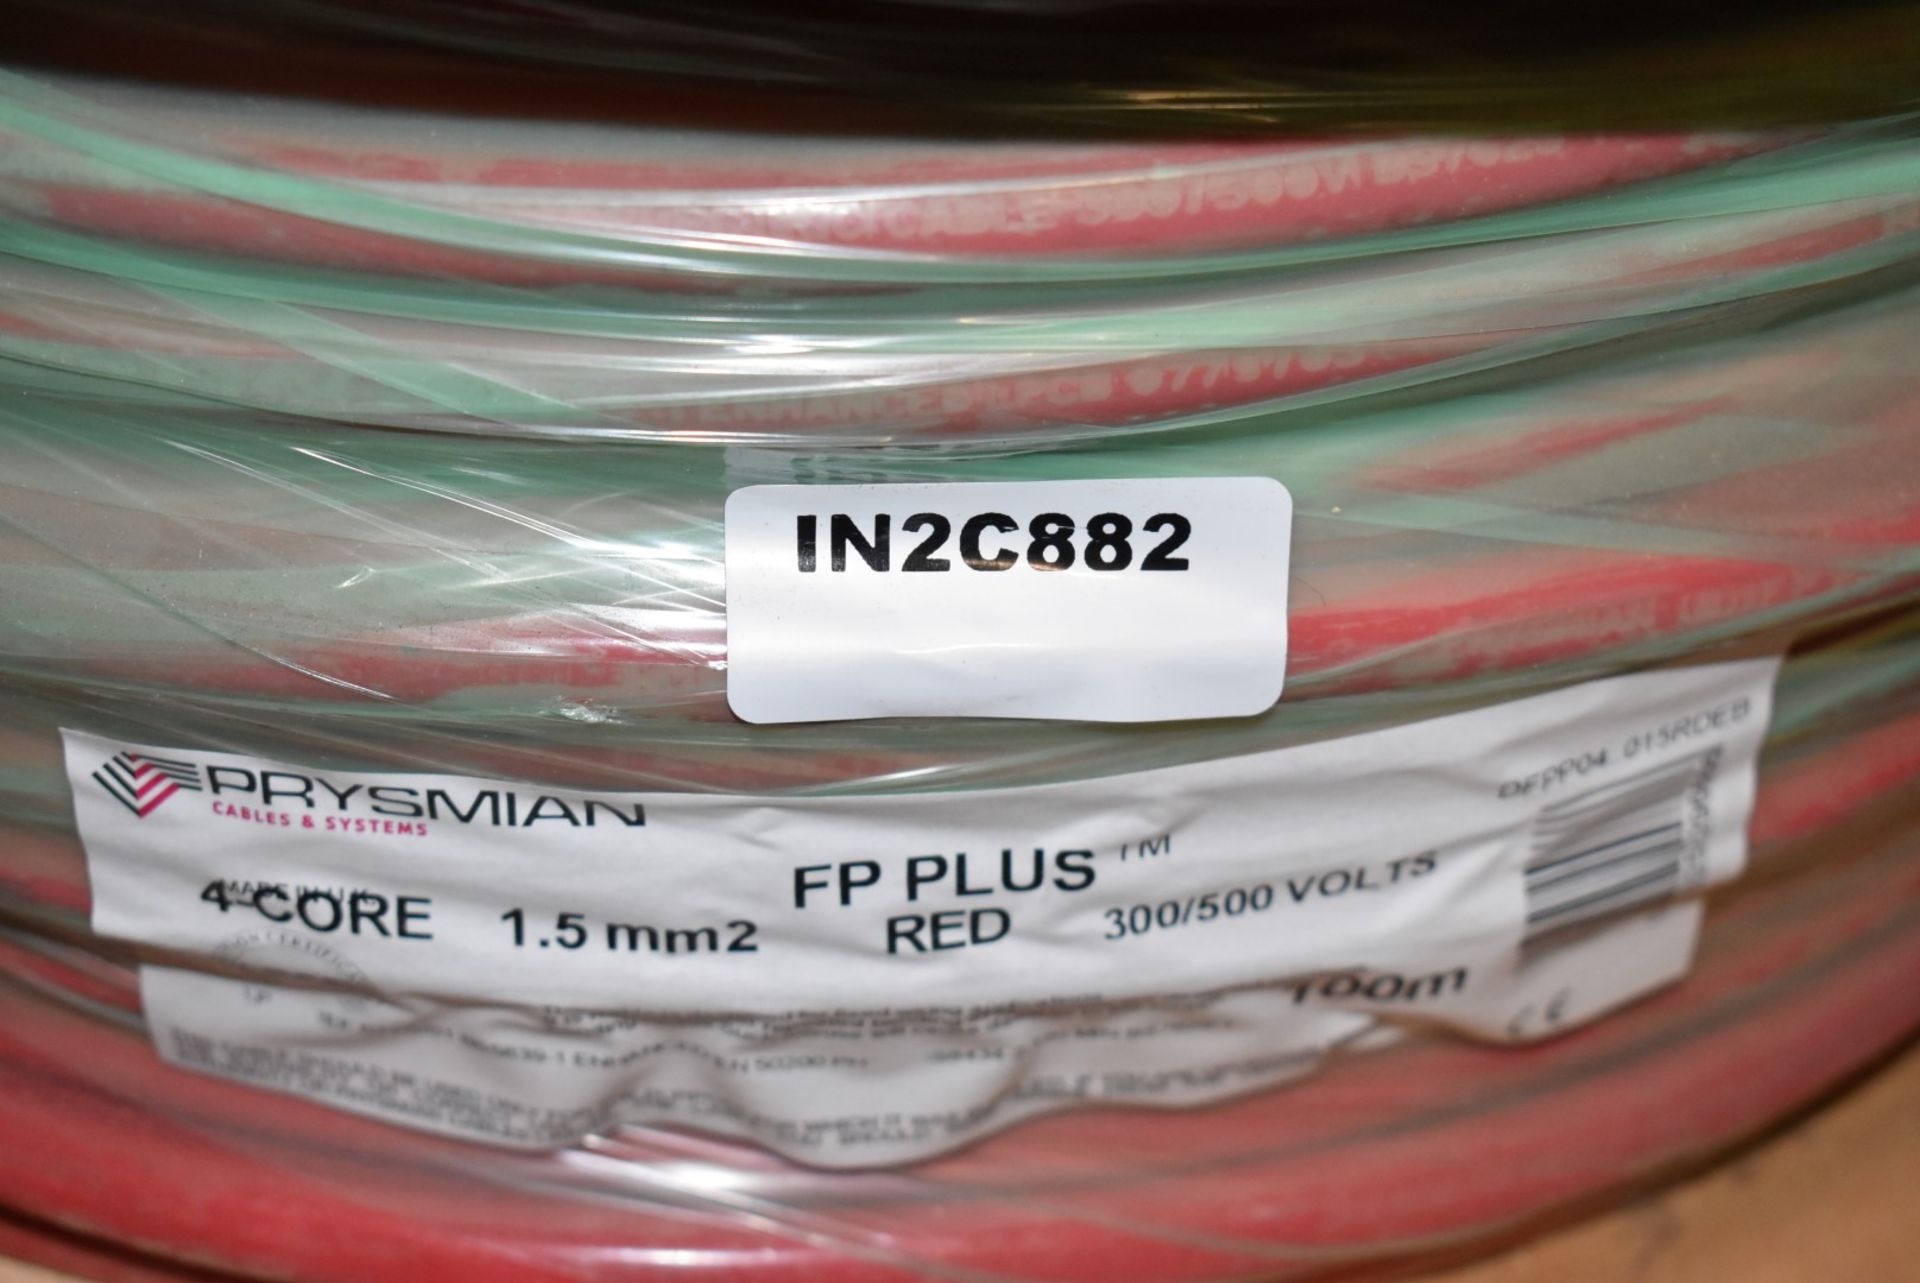 1 x Prysmian 100m FP Plus 4 Core 1.5mm2 Red Enhanced Fire Alarm Cable - 300/500v - RRP £360 - Image 2 of 5